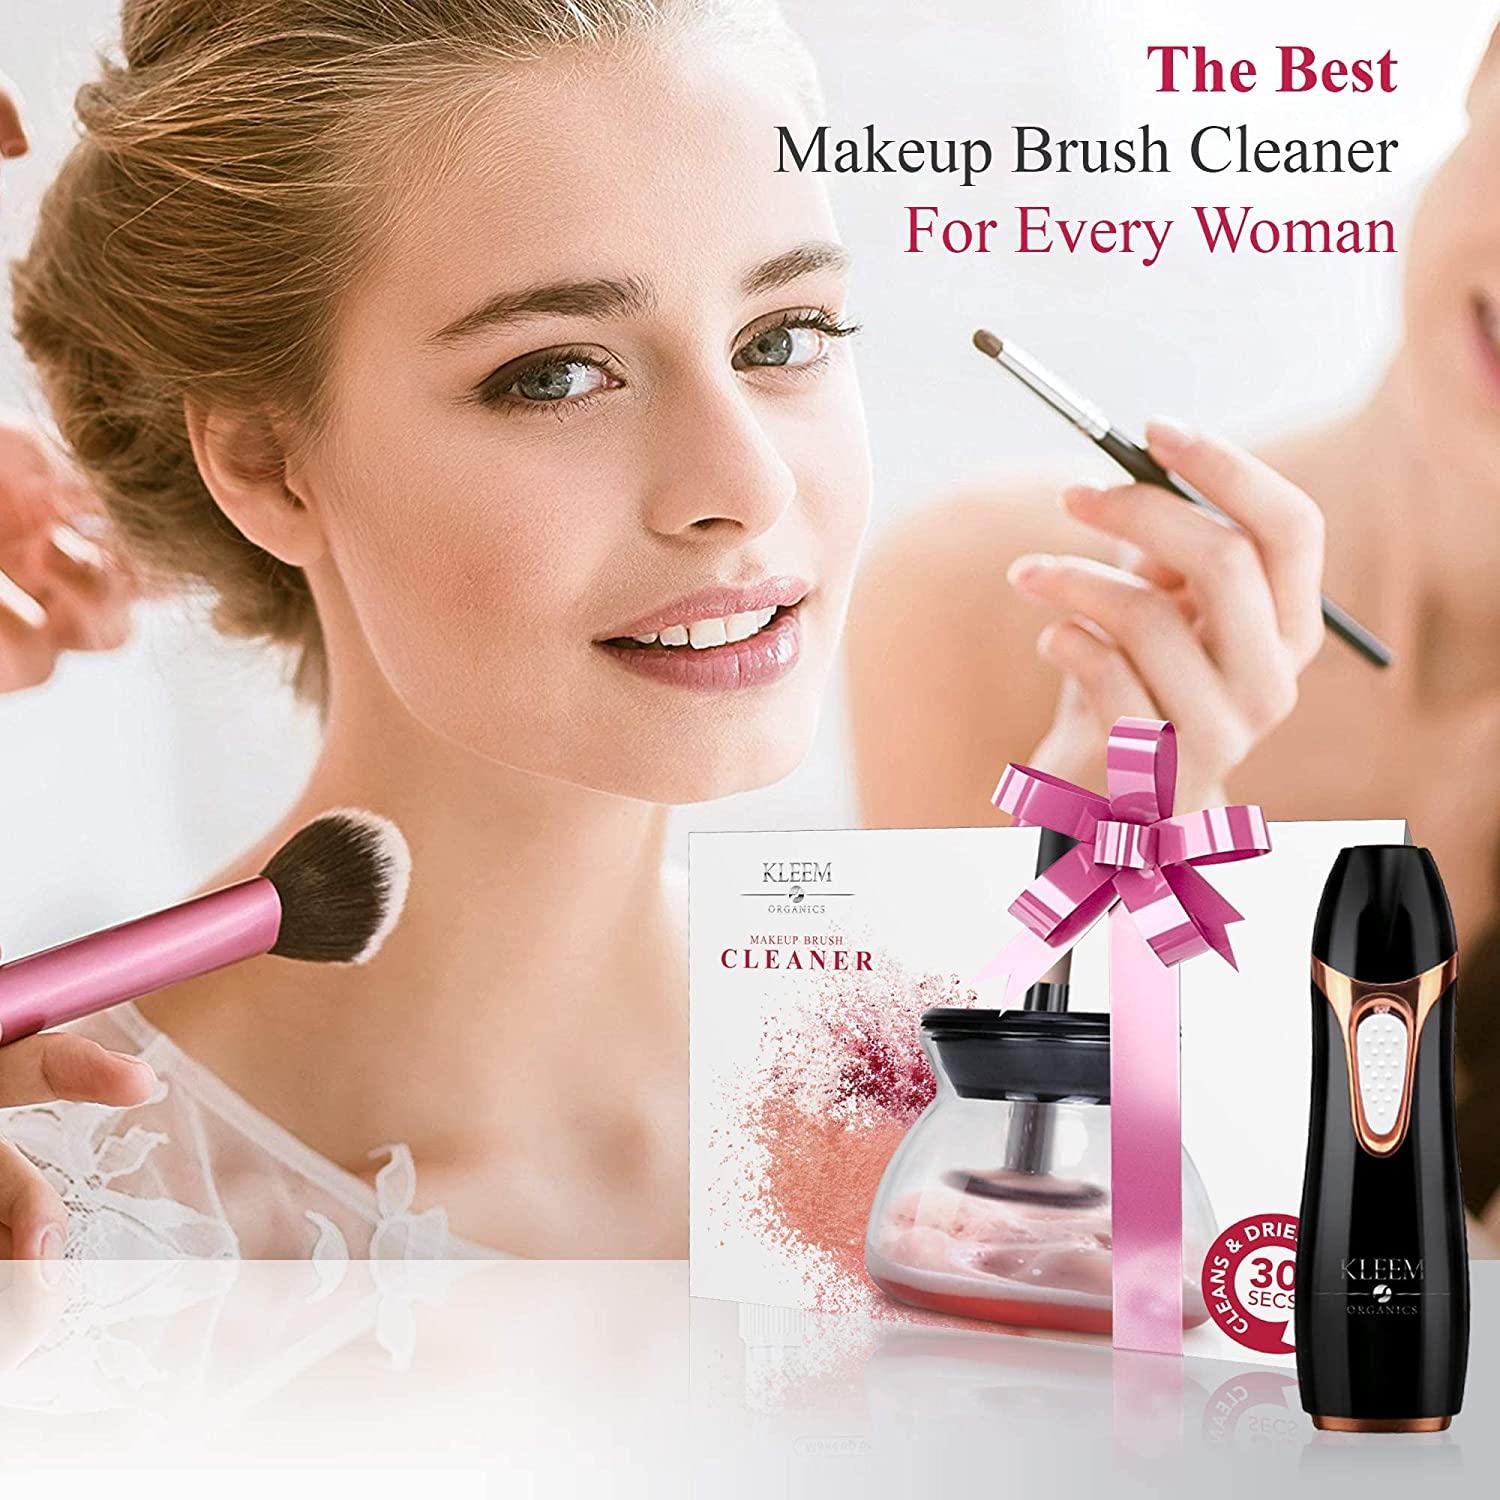 Makeup Brush Cleaners, Make Up Cleaning